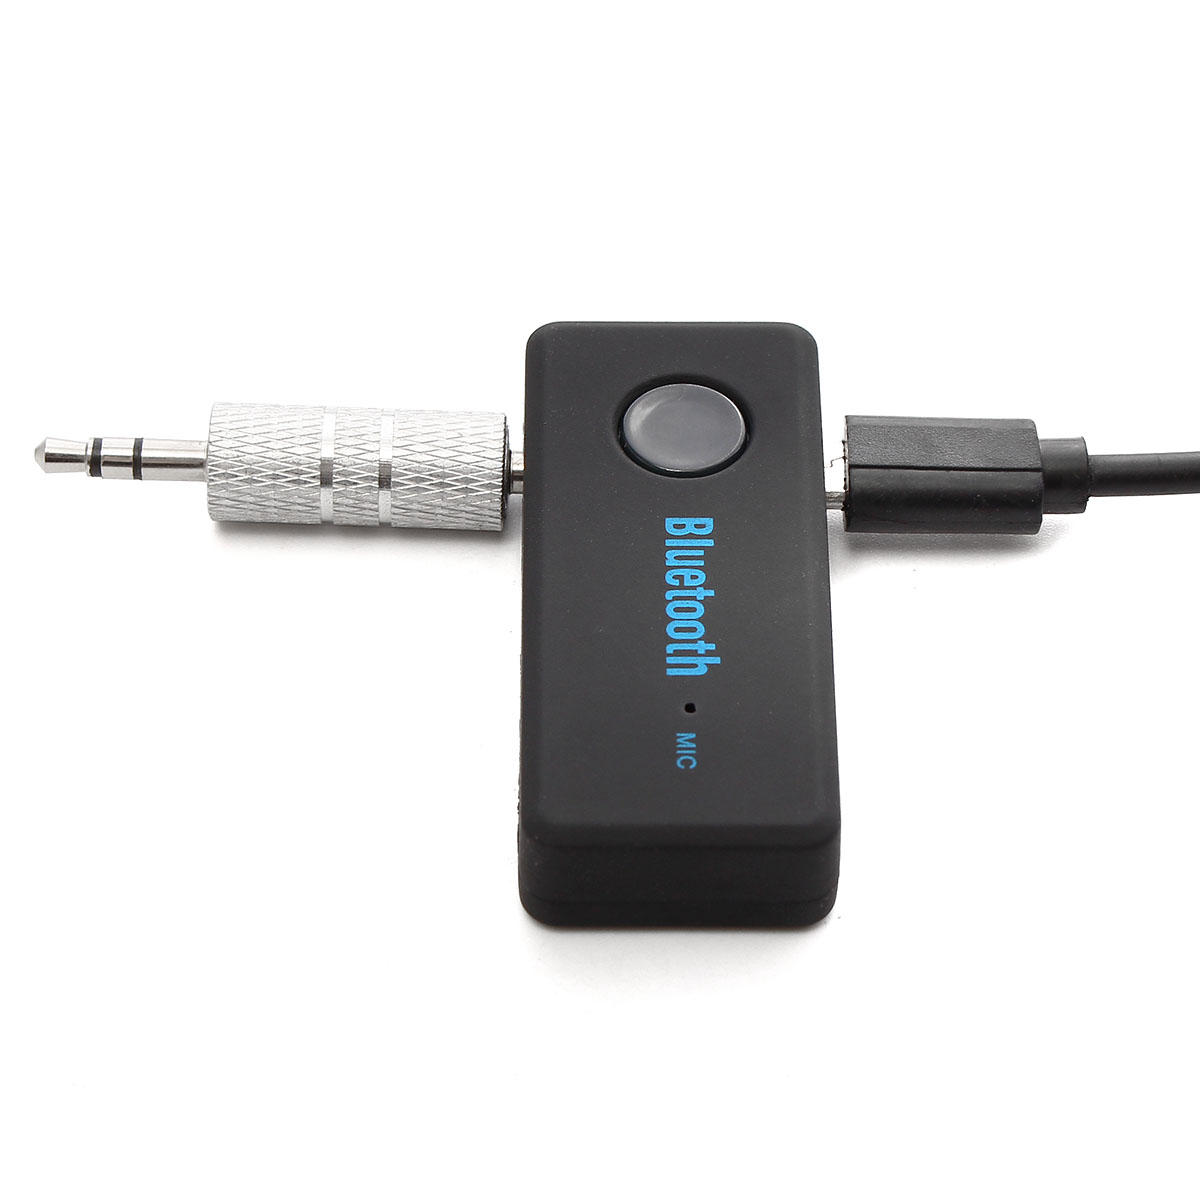 Wireless Bluetooth 3.5mm AUX Audio Stereo Music Home Car Receiver Adapter 